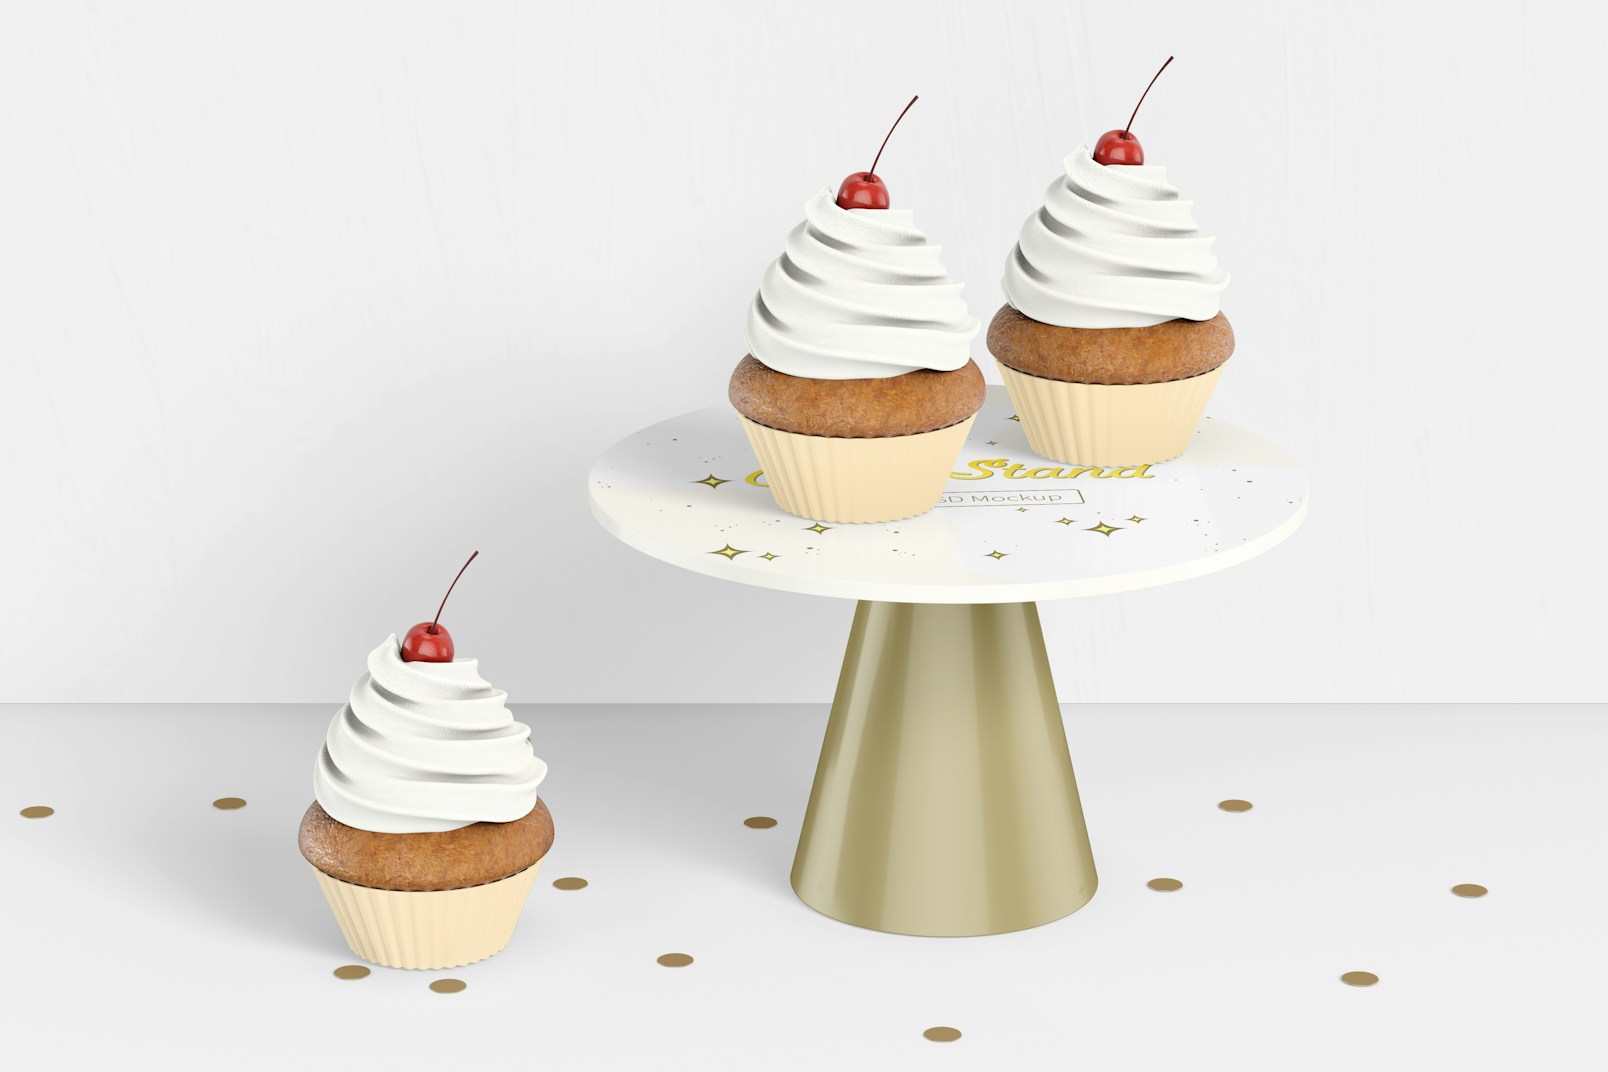 Cake Stand with Cupcakes Mockup